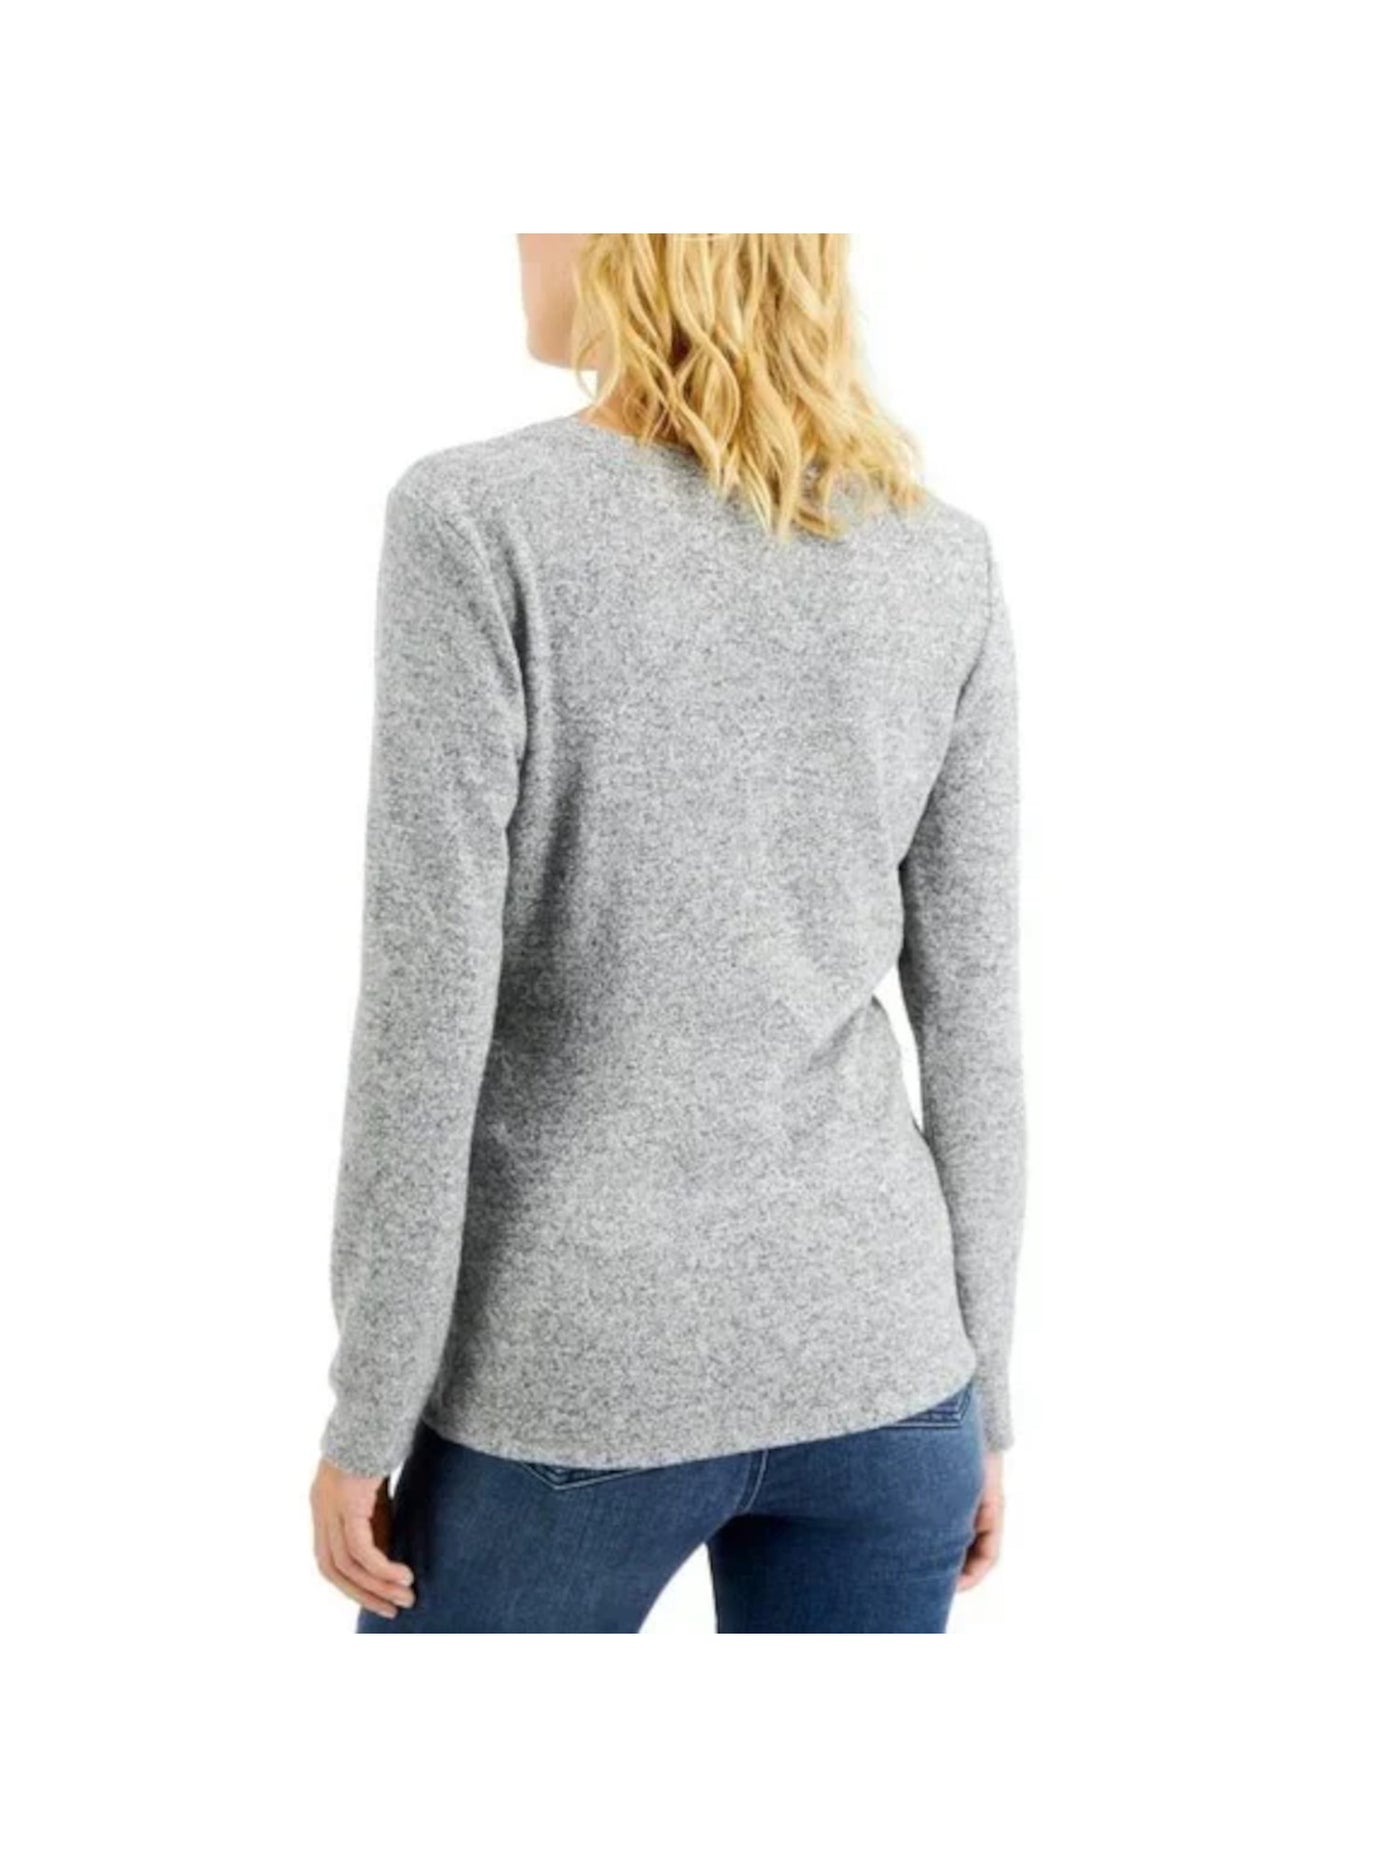 INC Womens Gray Metallic Side Ruched With Tie Long Sleeve Crew Neck Top L